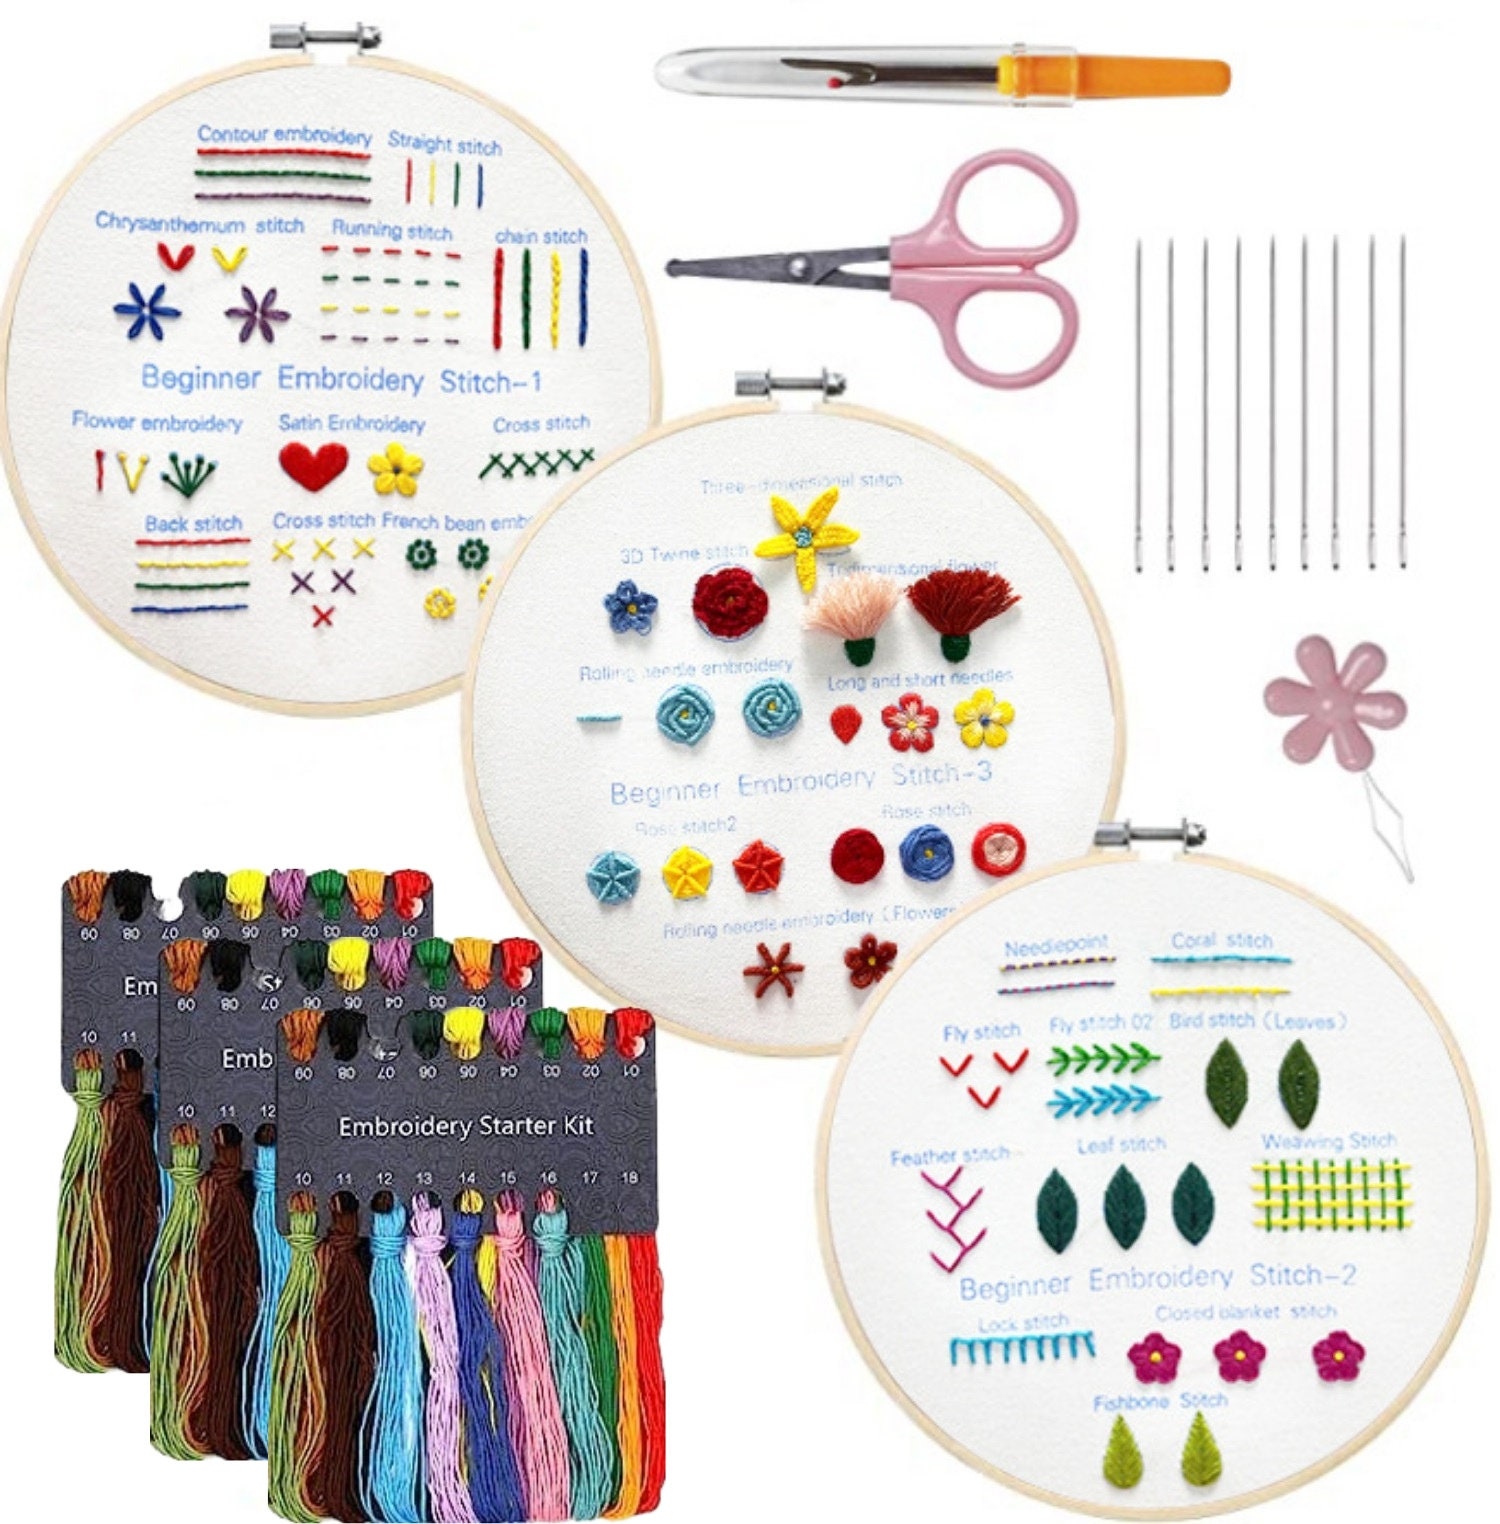 3 Pack Embroidery Starter Kit with Pattern, Kissbuty Full Range of Stamped Embroidery Kit Including Embroidery Fabric with Pattern, Bamboo